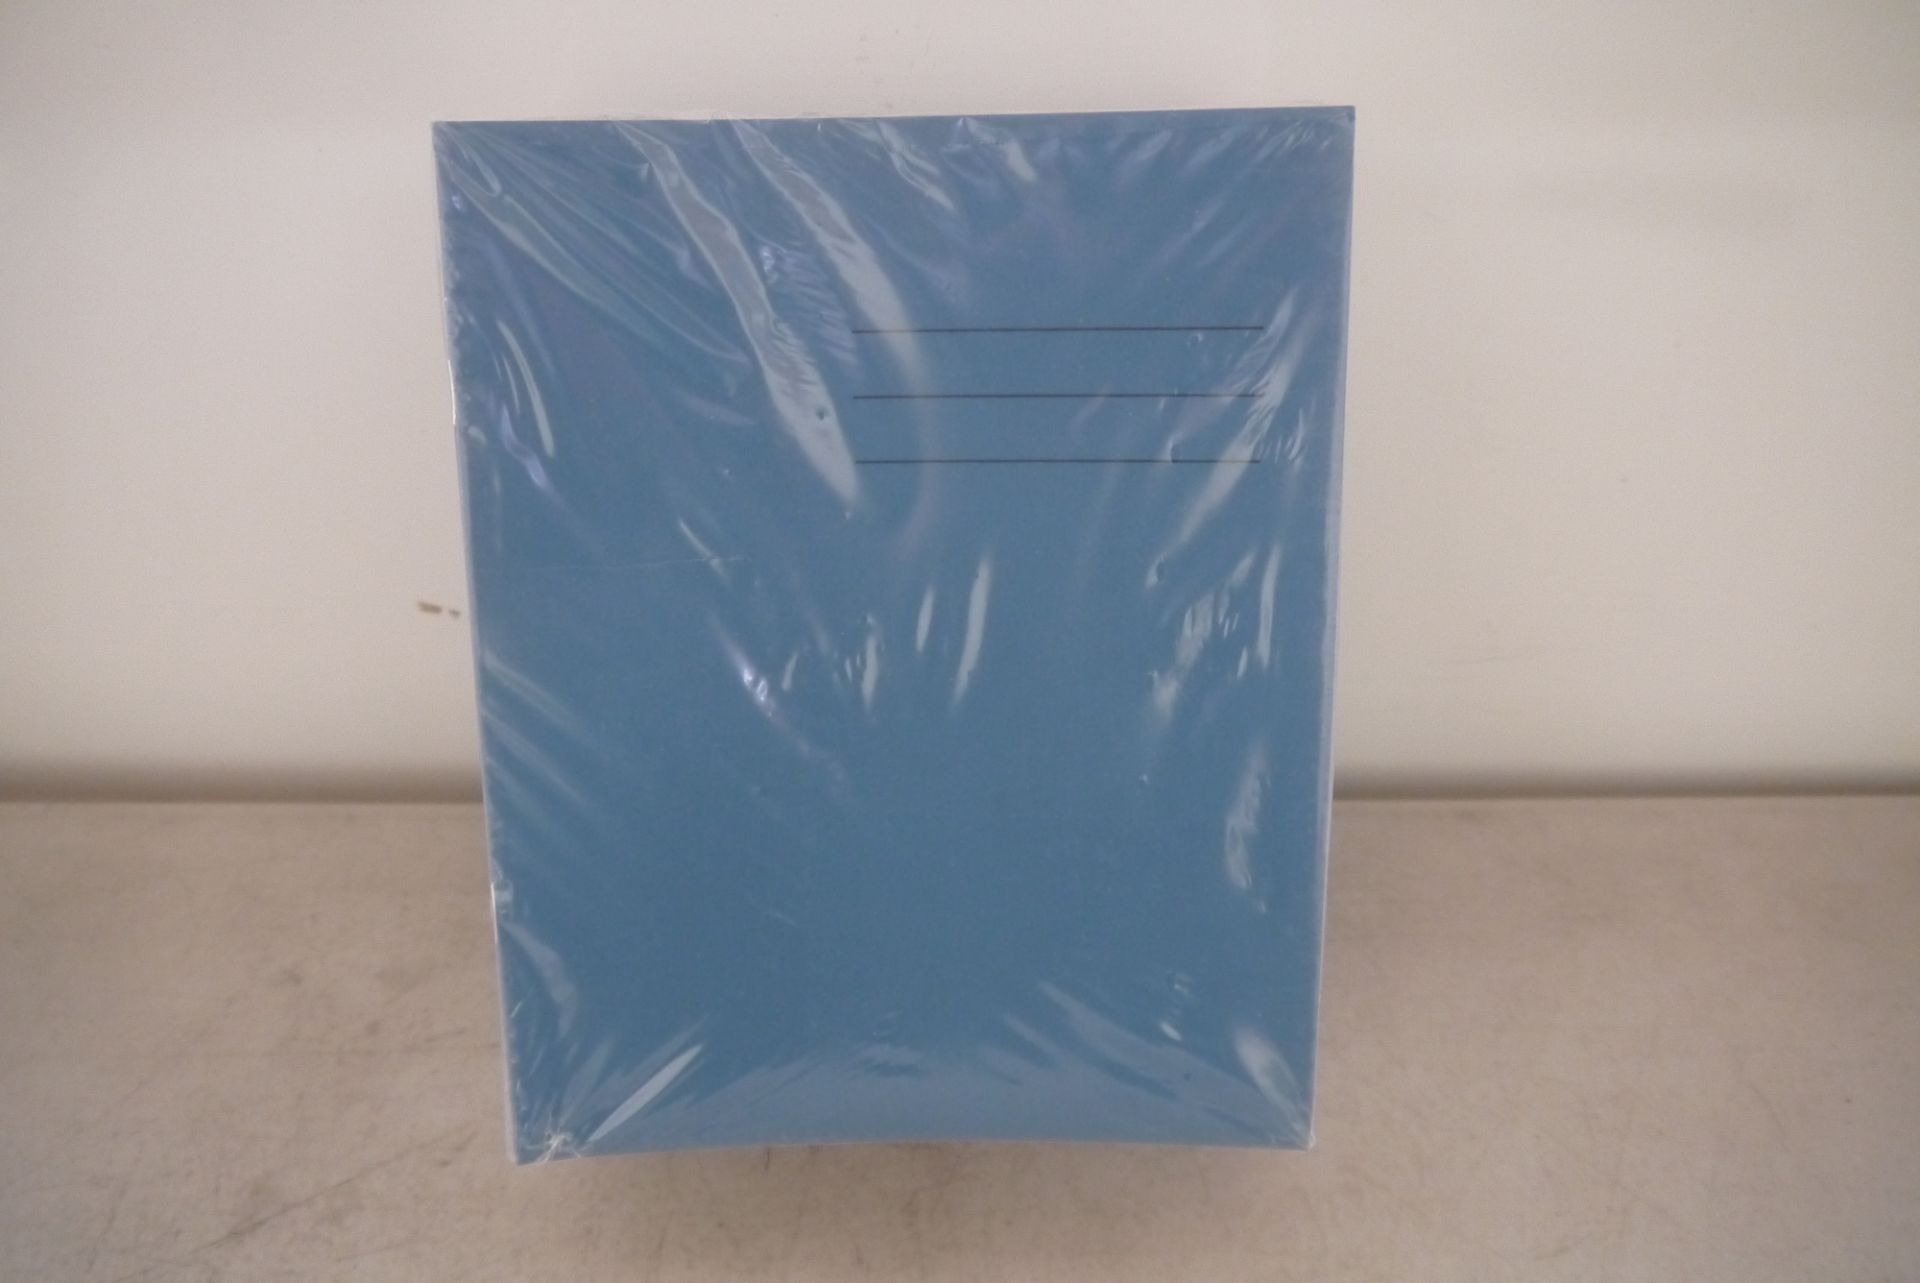 100 Pieces 8x6.5 5mm Square Light blue colour exercise books, brand new and boxed. RRP £16.99